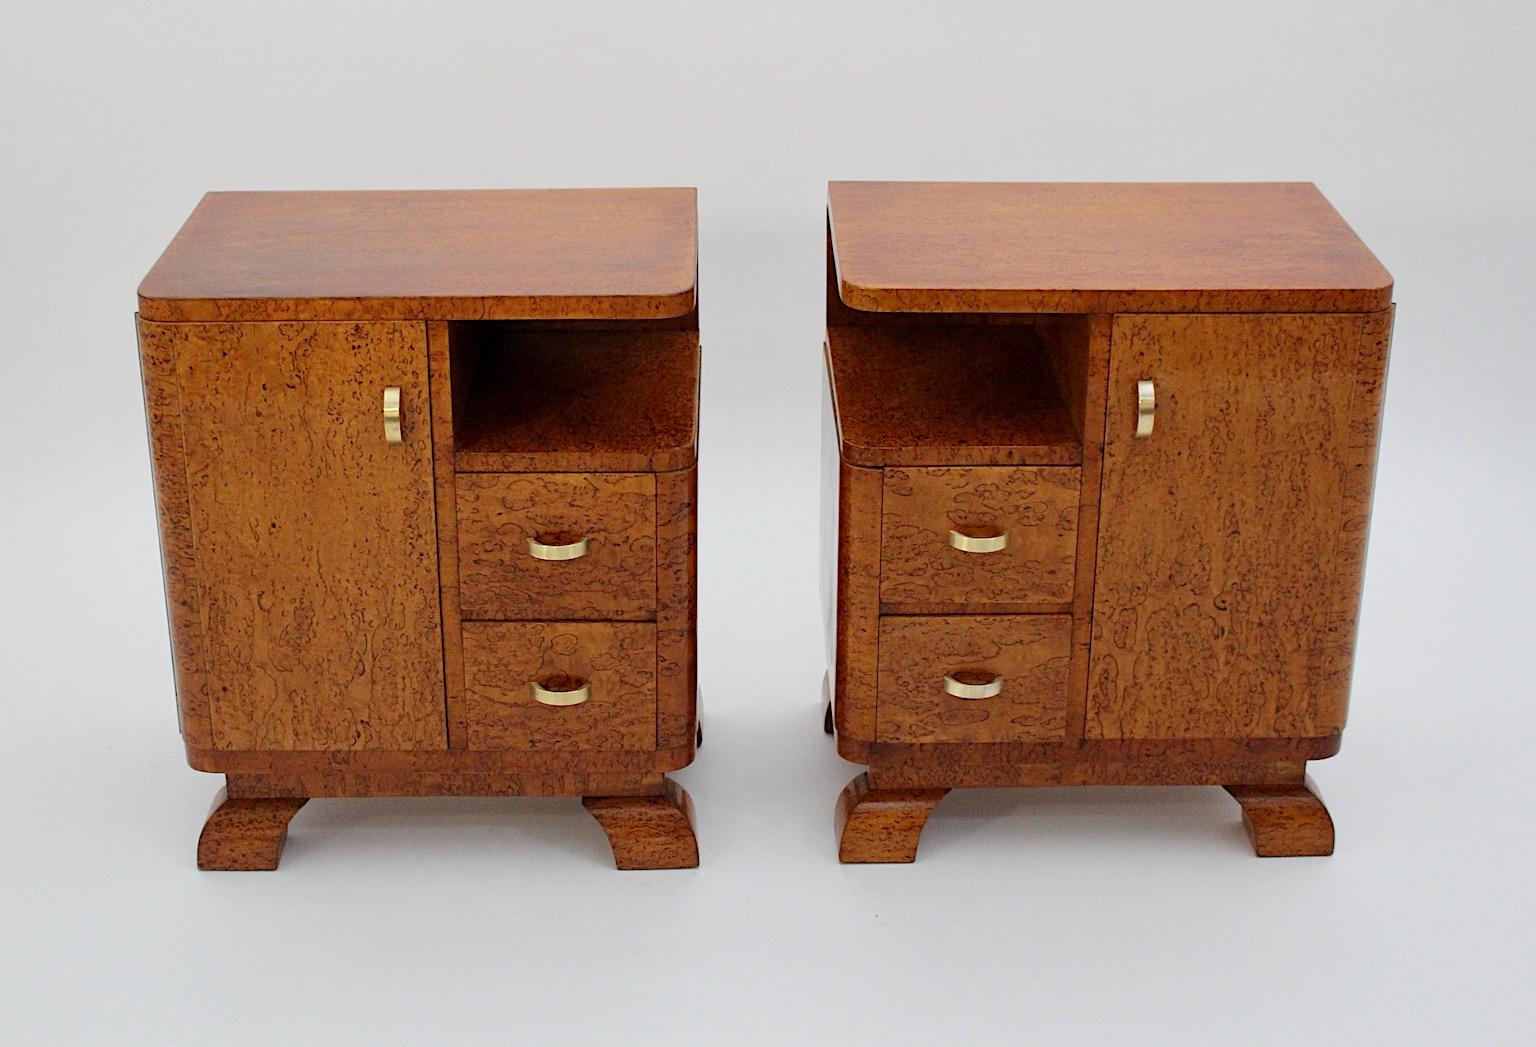 Art Deco vintage pair duo nightstands bedside tables from soft brown poplar veneer and brass 1930s Austria.
An amazing pair of nightstands or bedside tables from poplar veneer with brass handles, each nightstand shows 2 drawers and 1 door.
While the